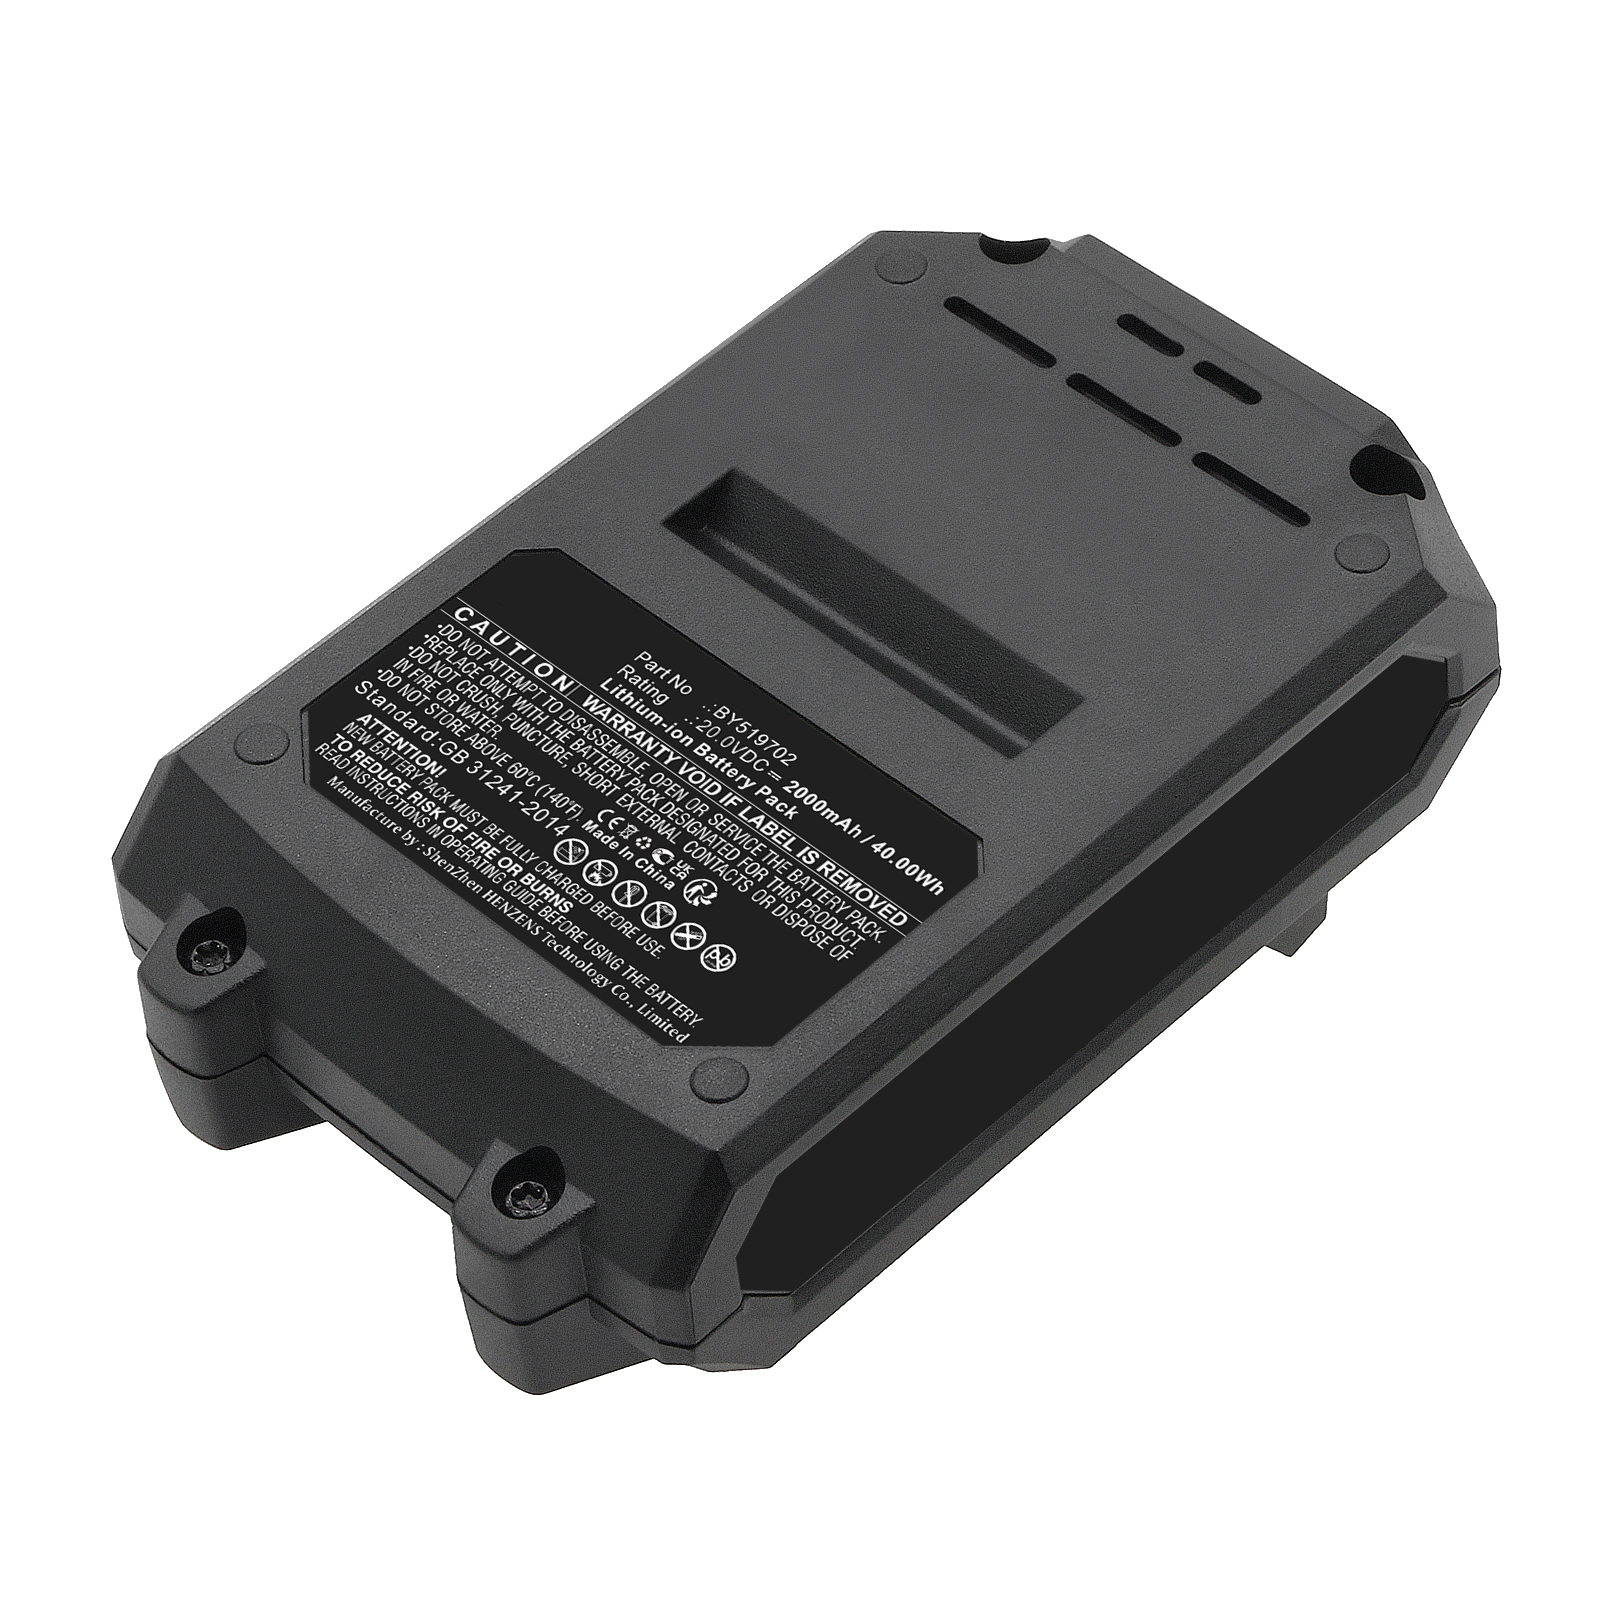 Synergy Digital Power Tool Battery, Compatible with Skil BY519702 Power Tool Battery (Li-ion, 20V, 2000mAh)